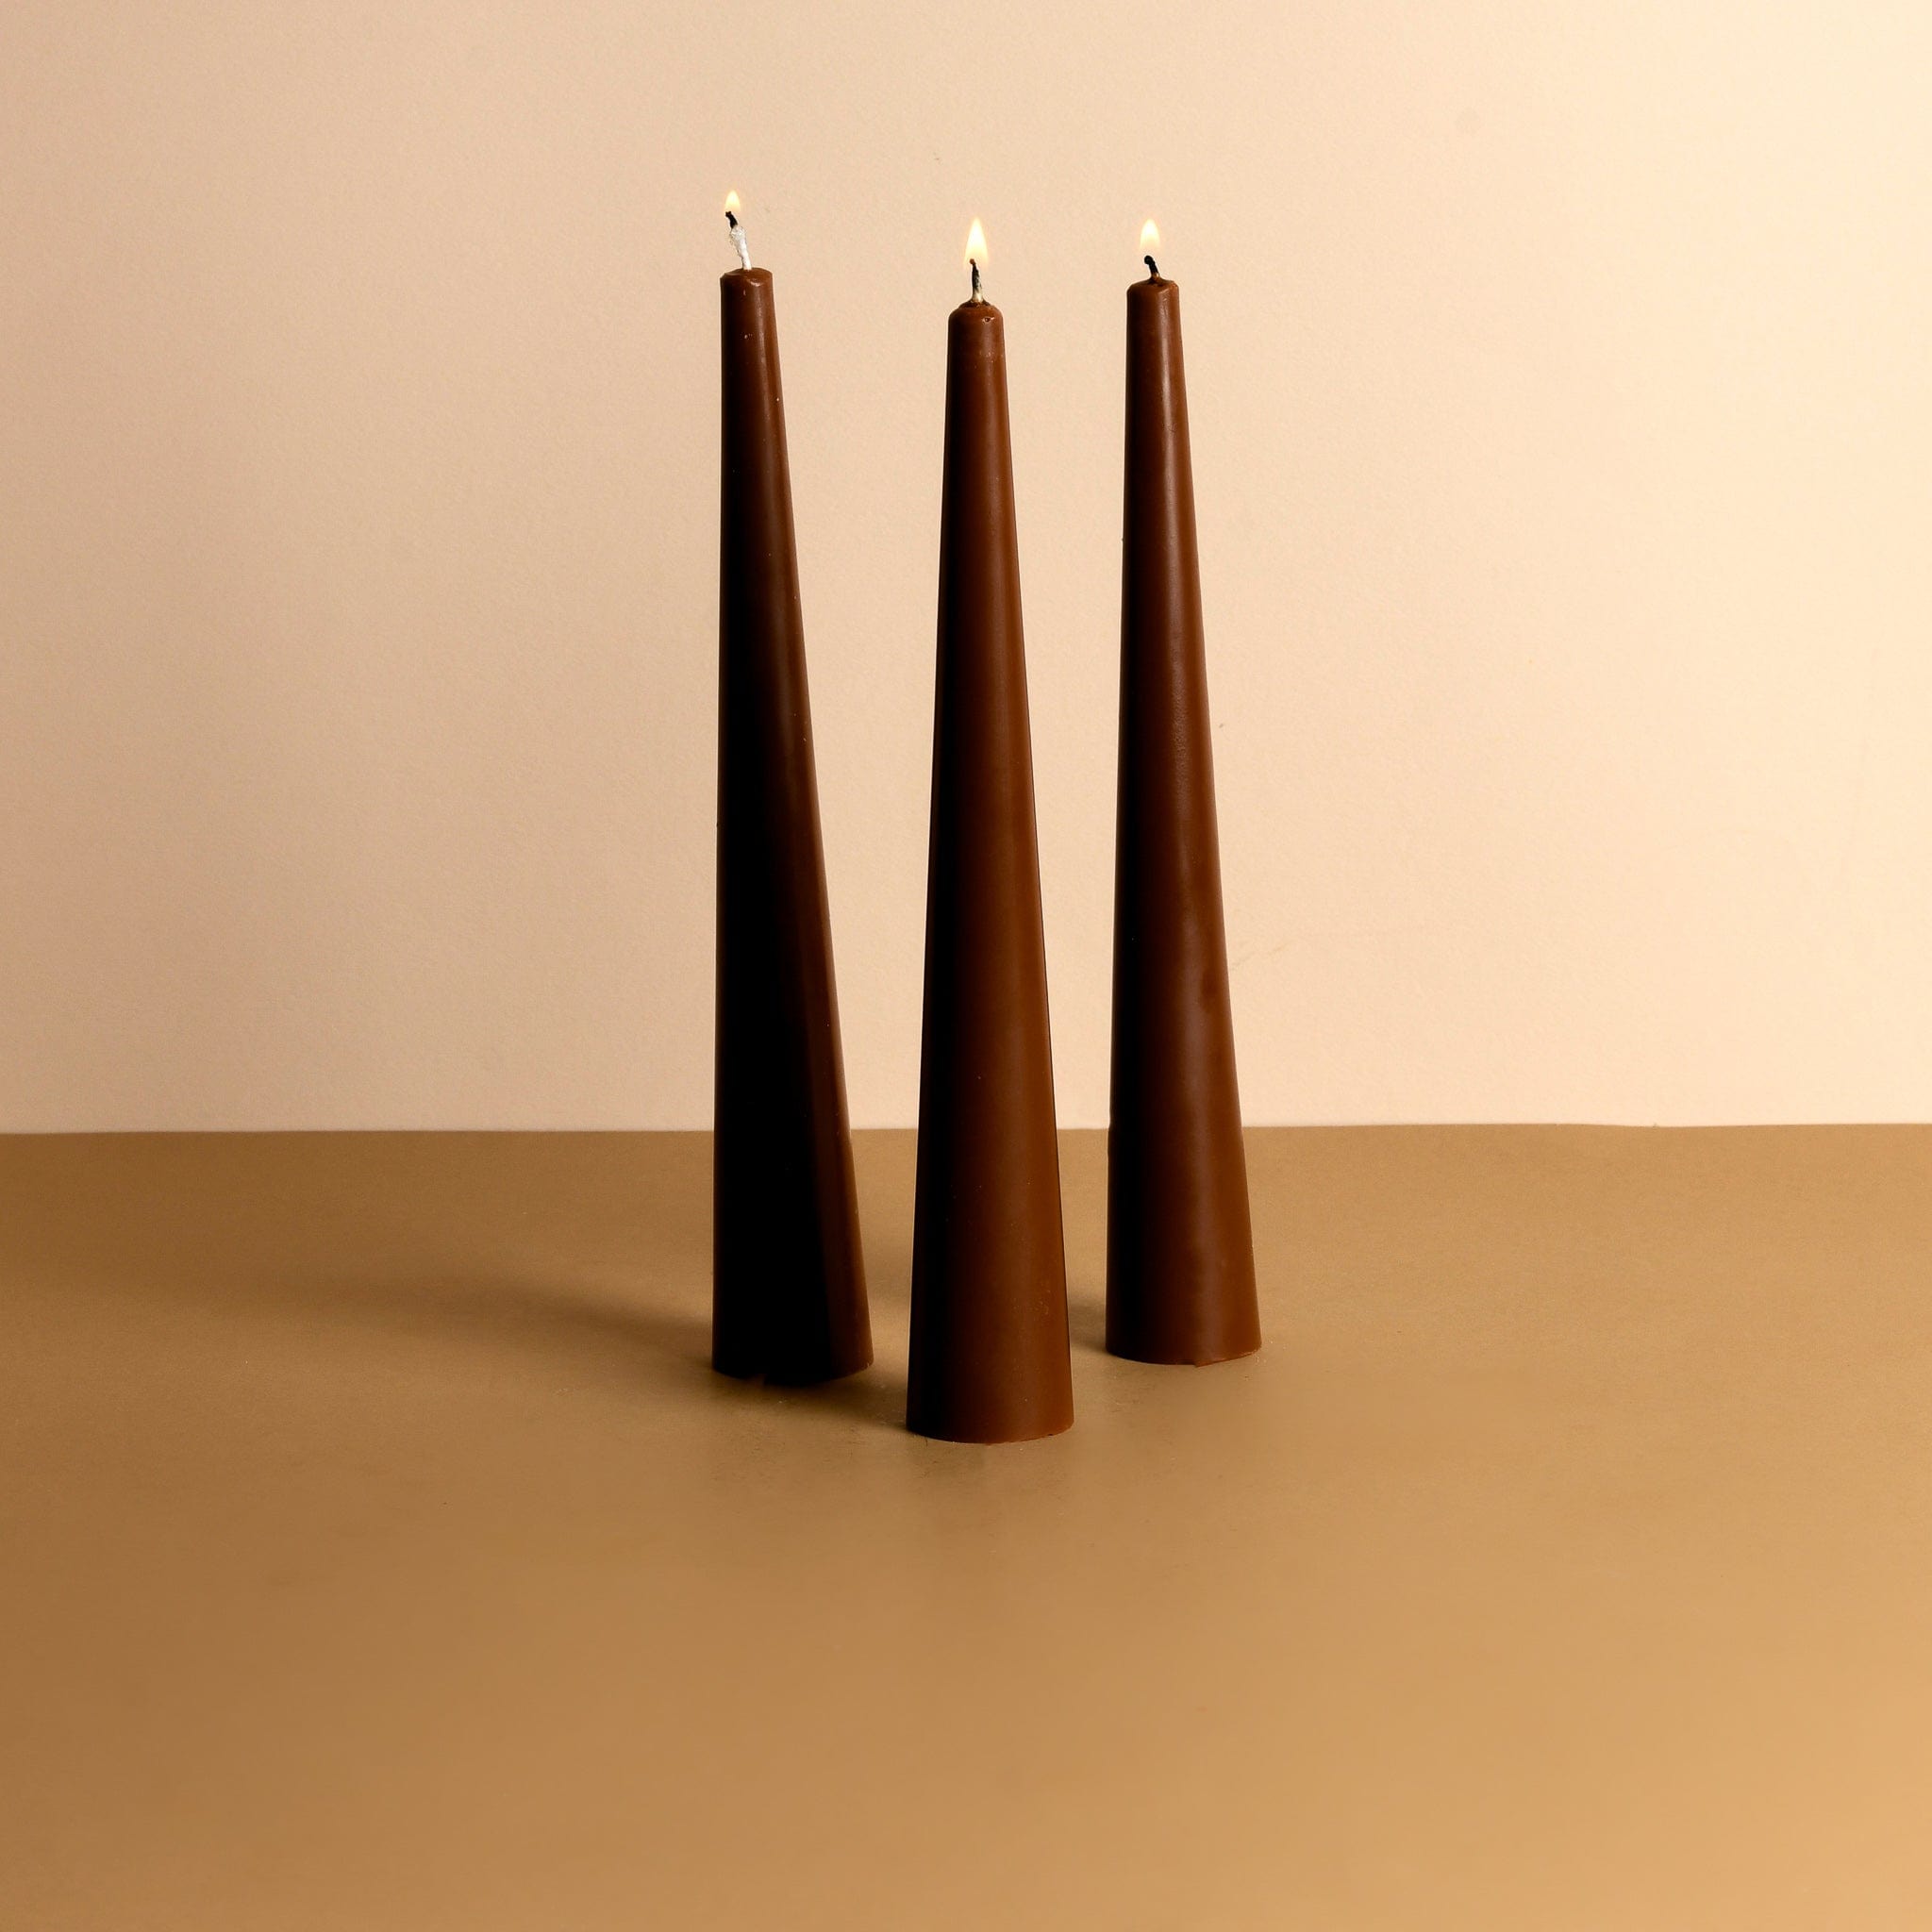 Set of 3 Chocolate Brown 10" Conical Candles - Tarte au Chocolat Scented